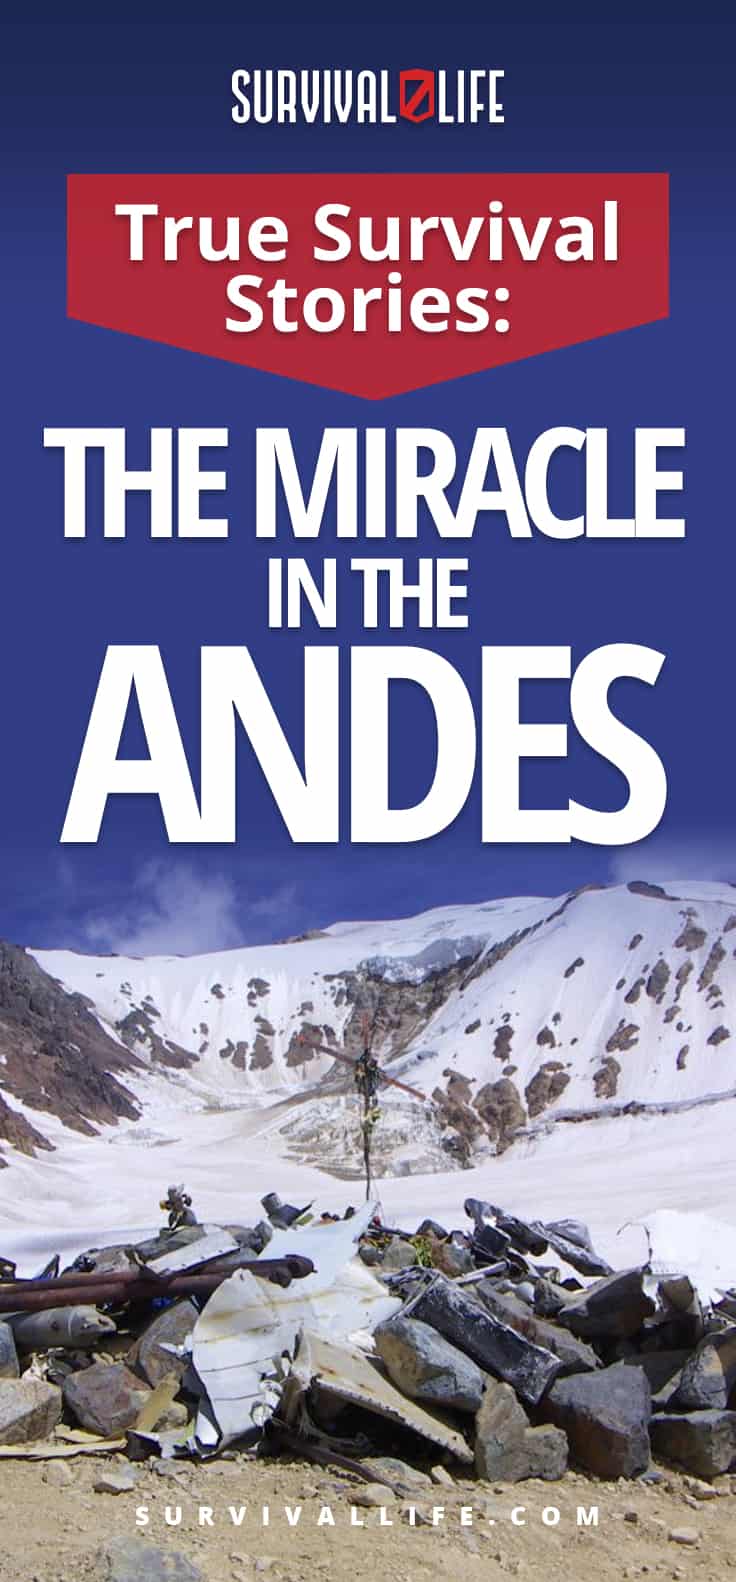 True Survival Stories: The Miracle In the Andes